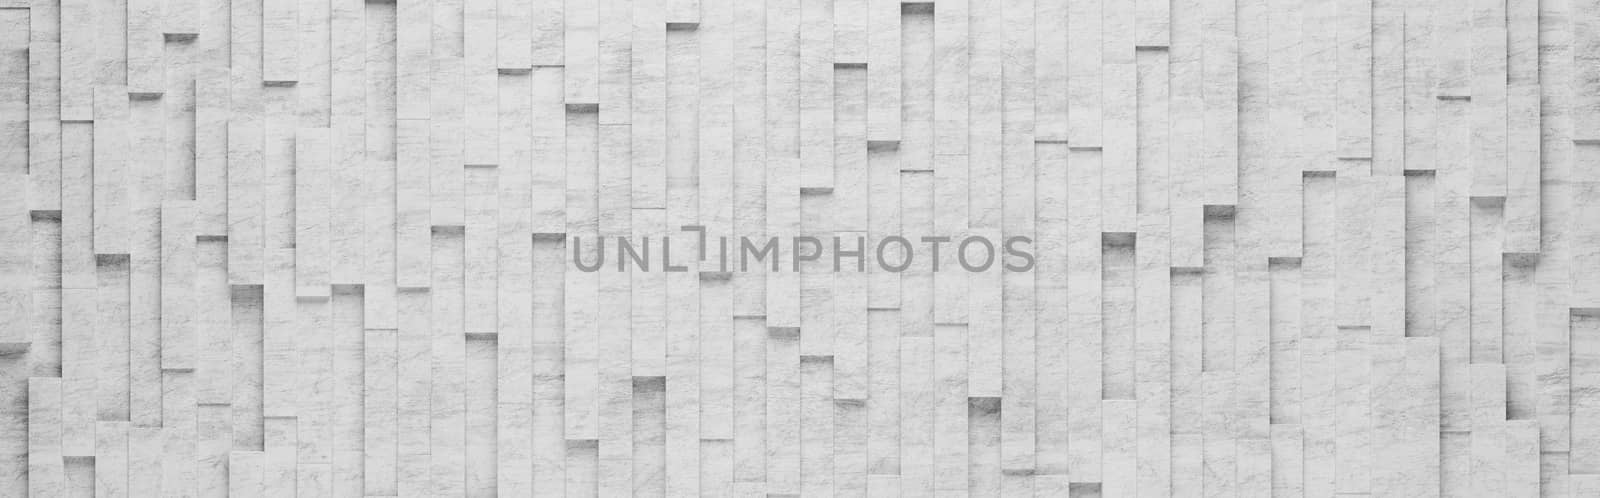 Wall of Gray Vertical Rectangles Tiles Arranged in Random Height 3D Pattern Background Illustration